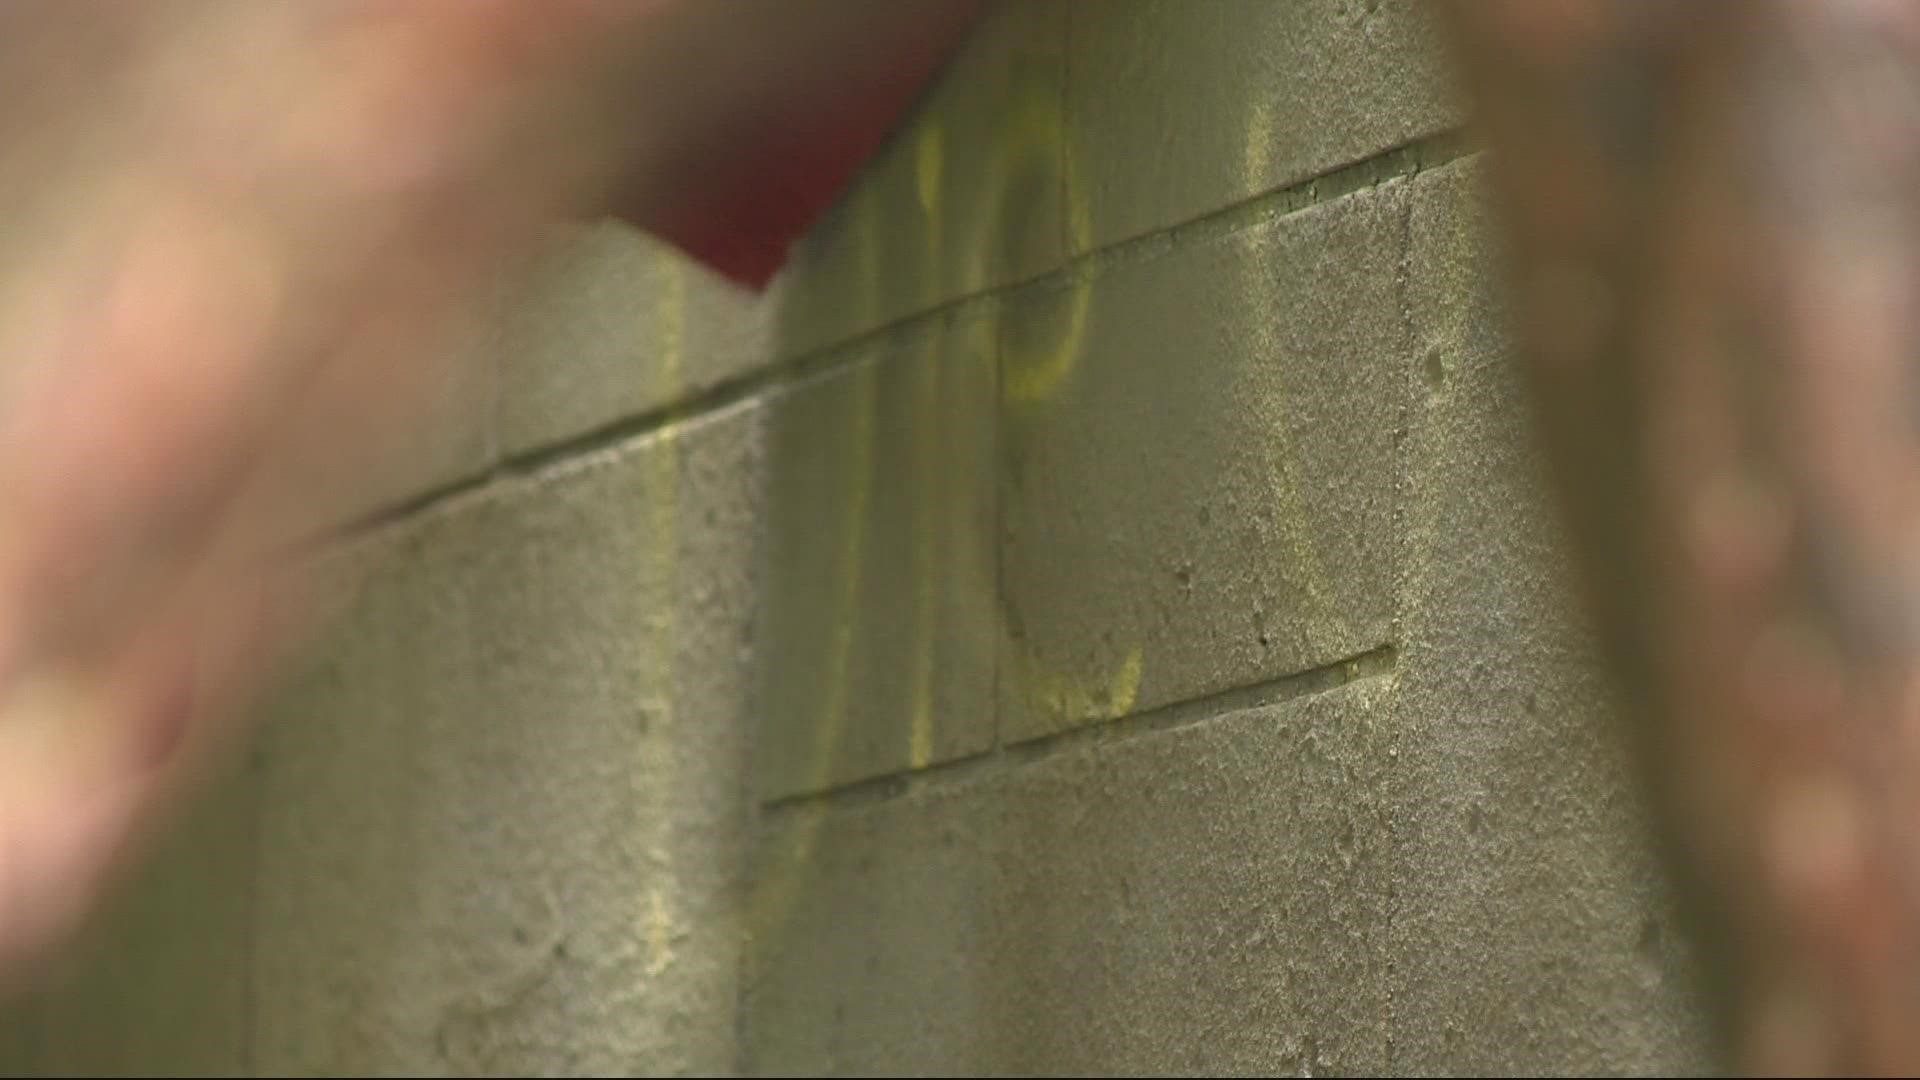 Monday morning, staff members at Congregation Beth Israel in Northwest Portland discovered someone had vandalized their synagogue.